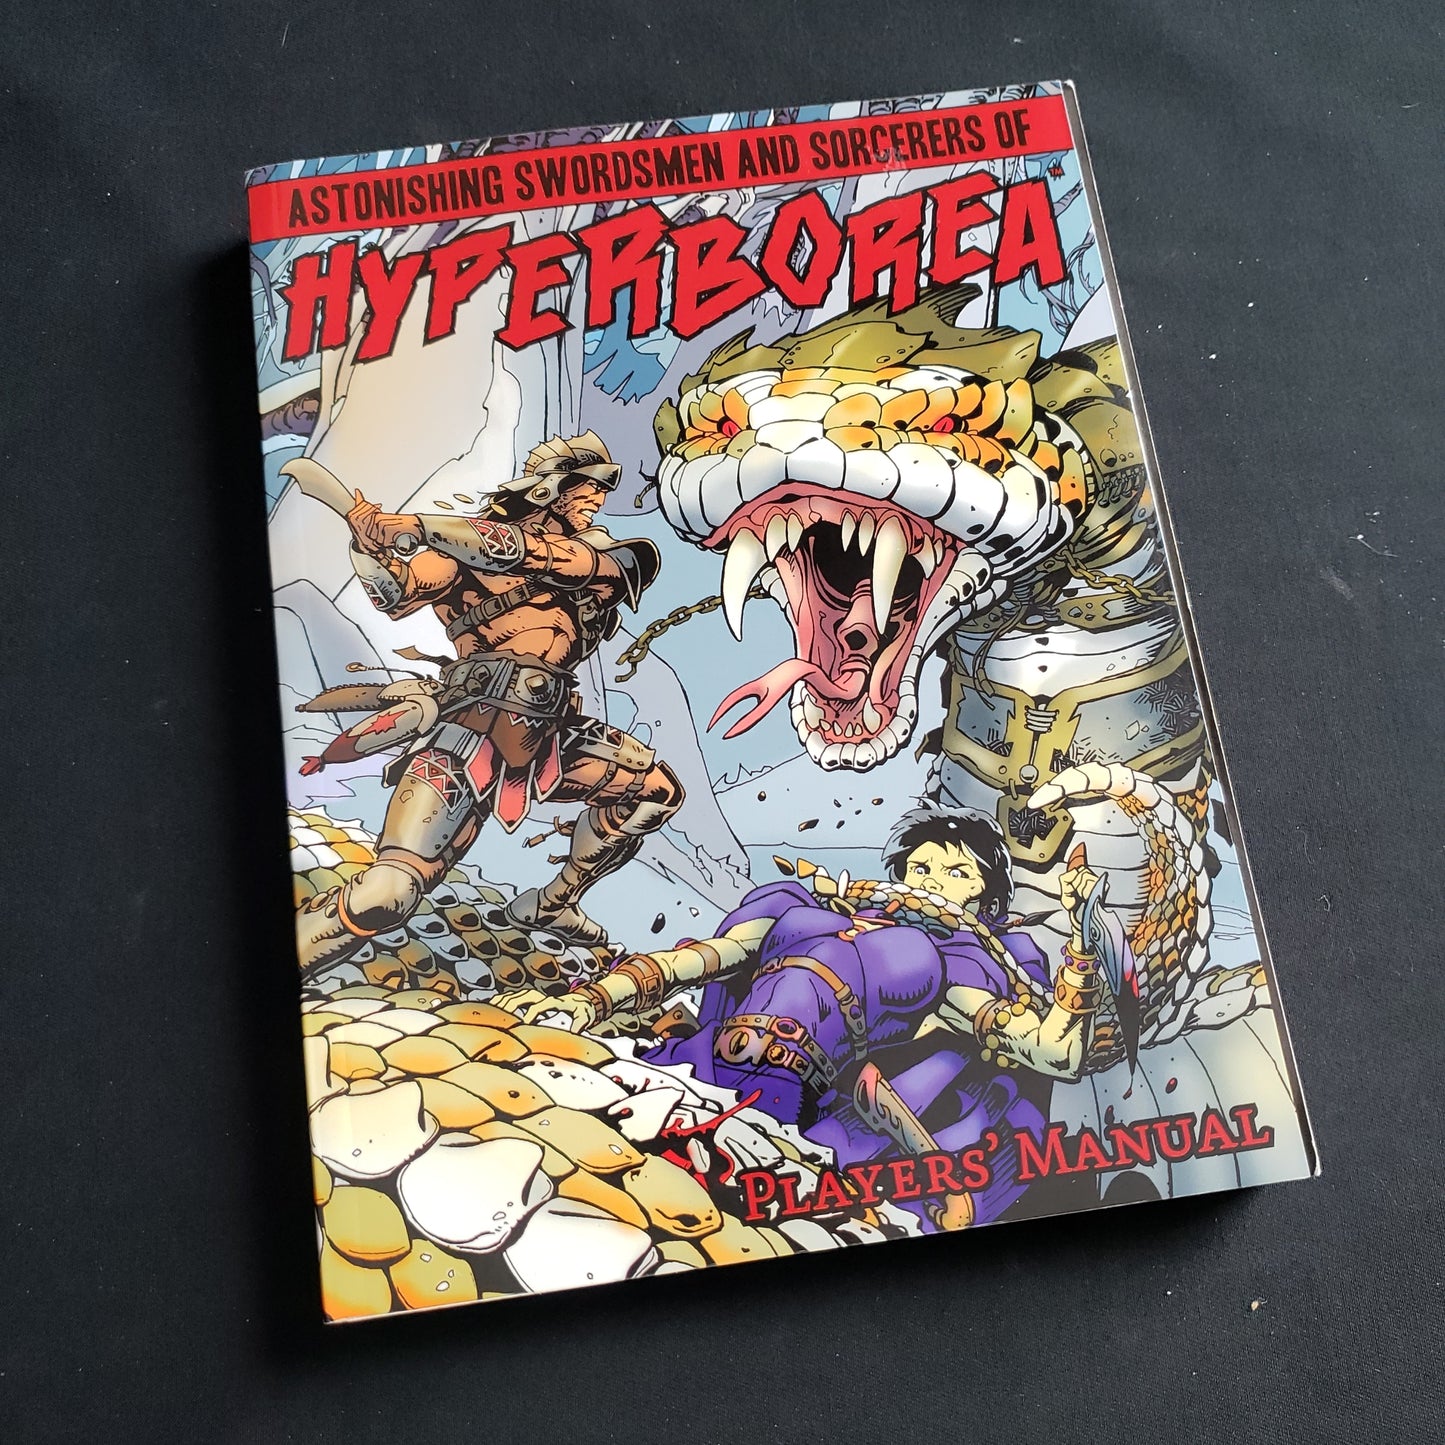 Image shows the front cover of the Players' Manual for the Astonishing Swordsmen & Sorcerers of Hyperborea roleplaying game